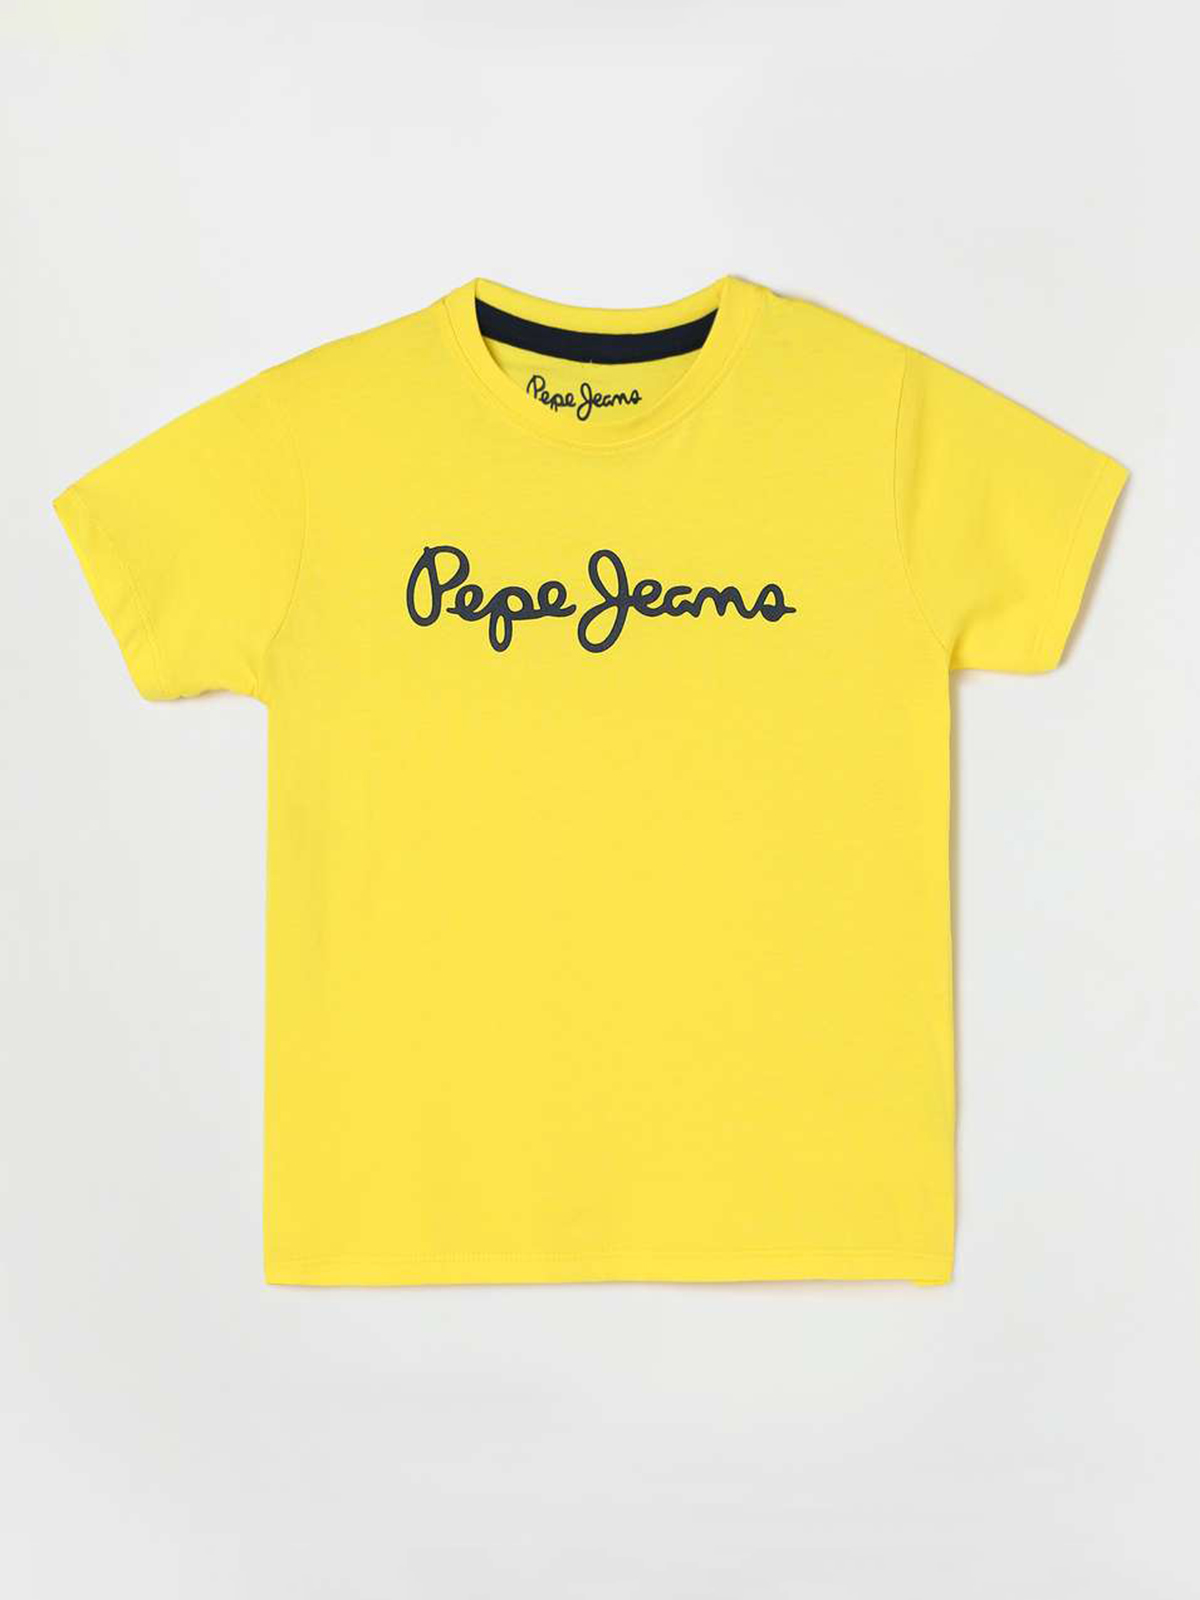 Pepe Jeans Shirt Vintage 90s Pepe Jeans Embroidery Logo Tee T Shirt Size L  - Etsy